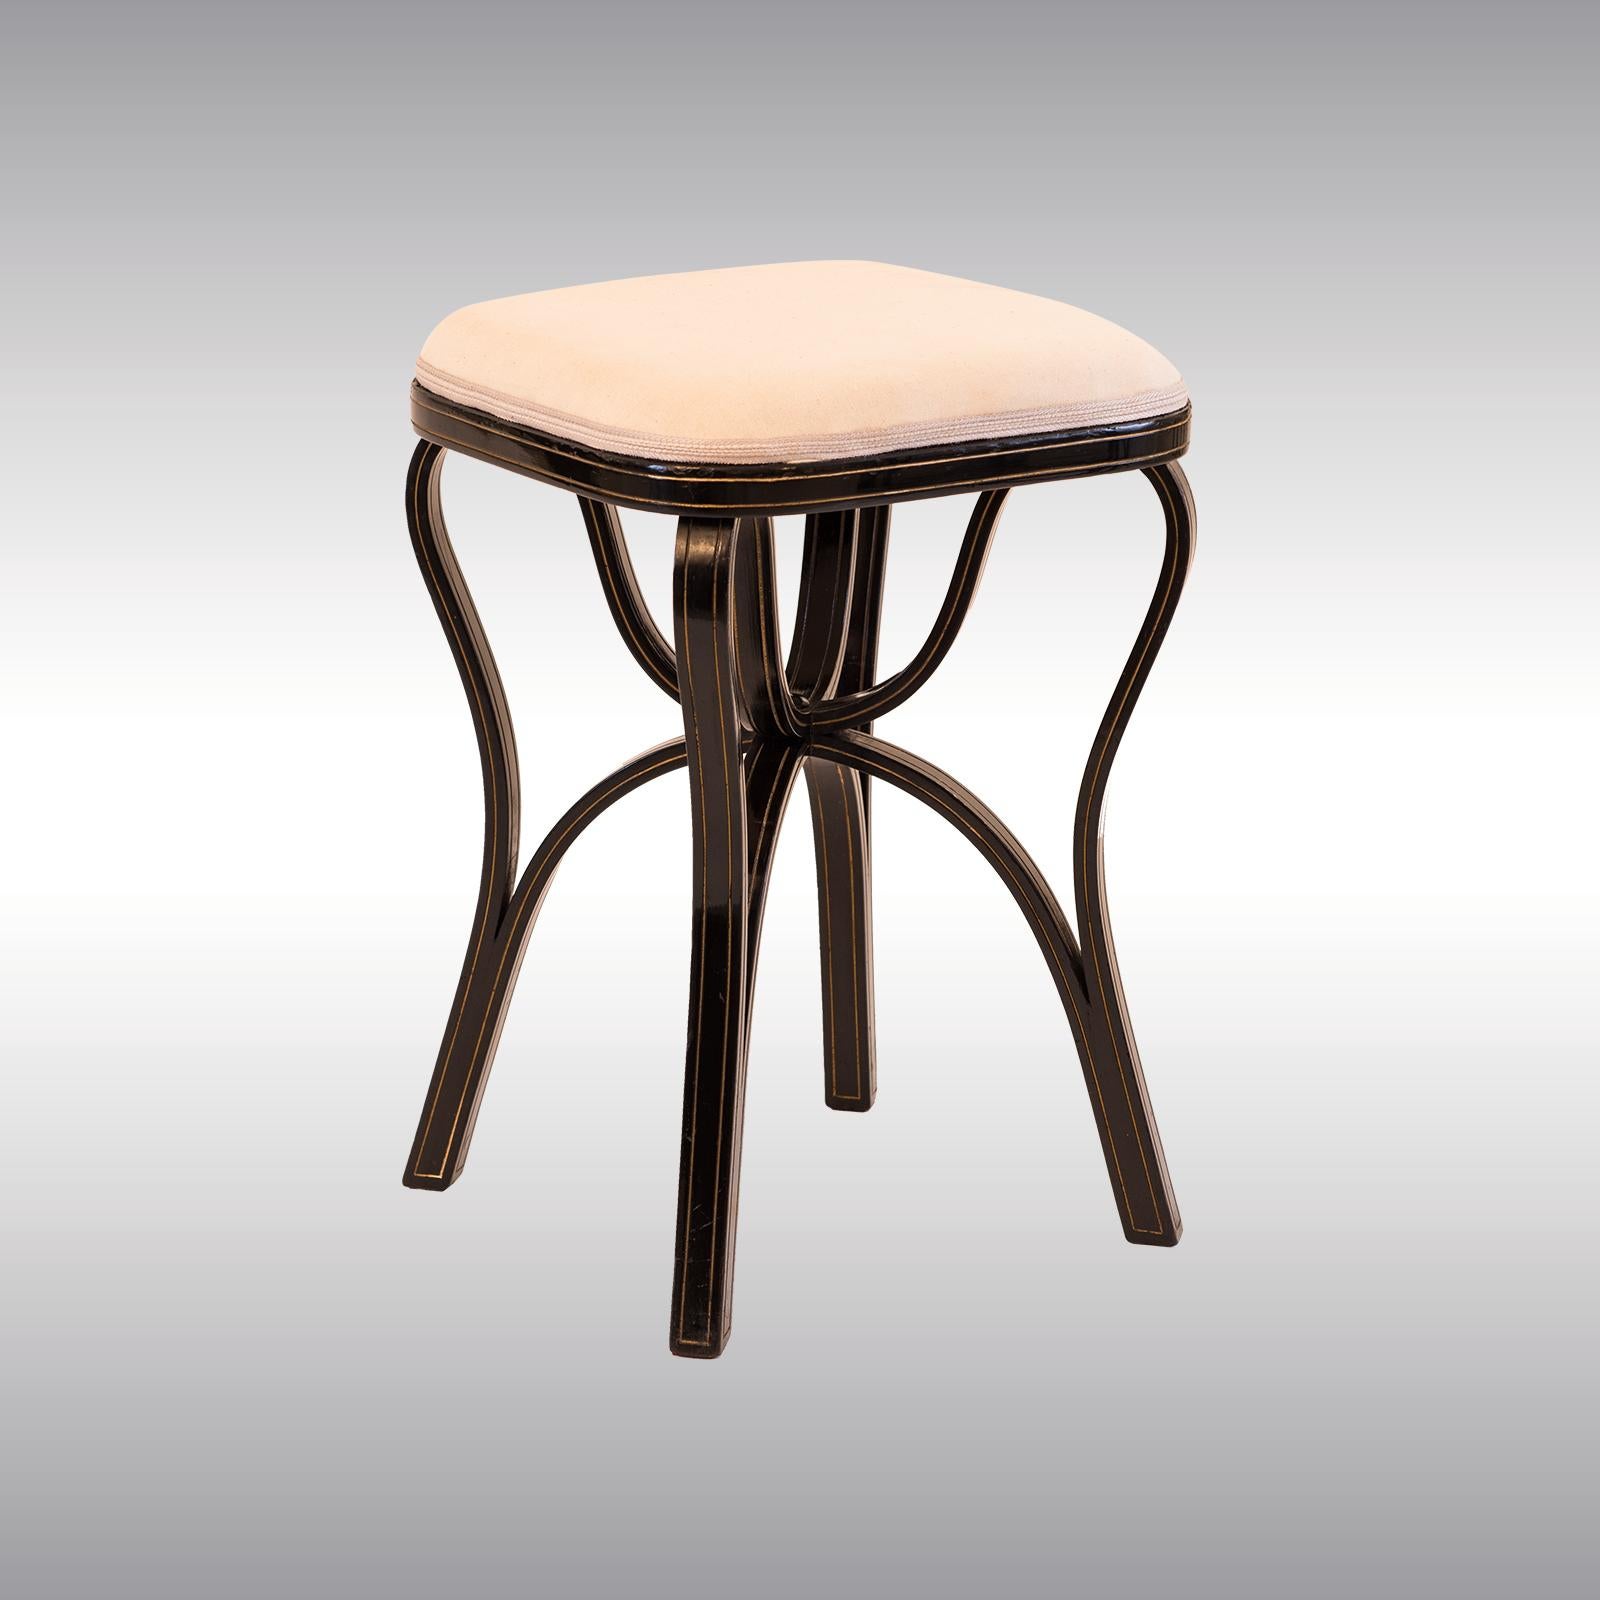 Wonderful and rare Thonet stool, published already in the 1888 Thonet Catalogue on page 23 as Salon-Stockerl Nr 5 zum Polstern
Material

Beechwood black stained with gold colored notches.